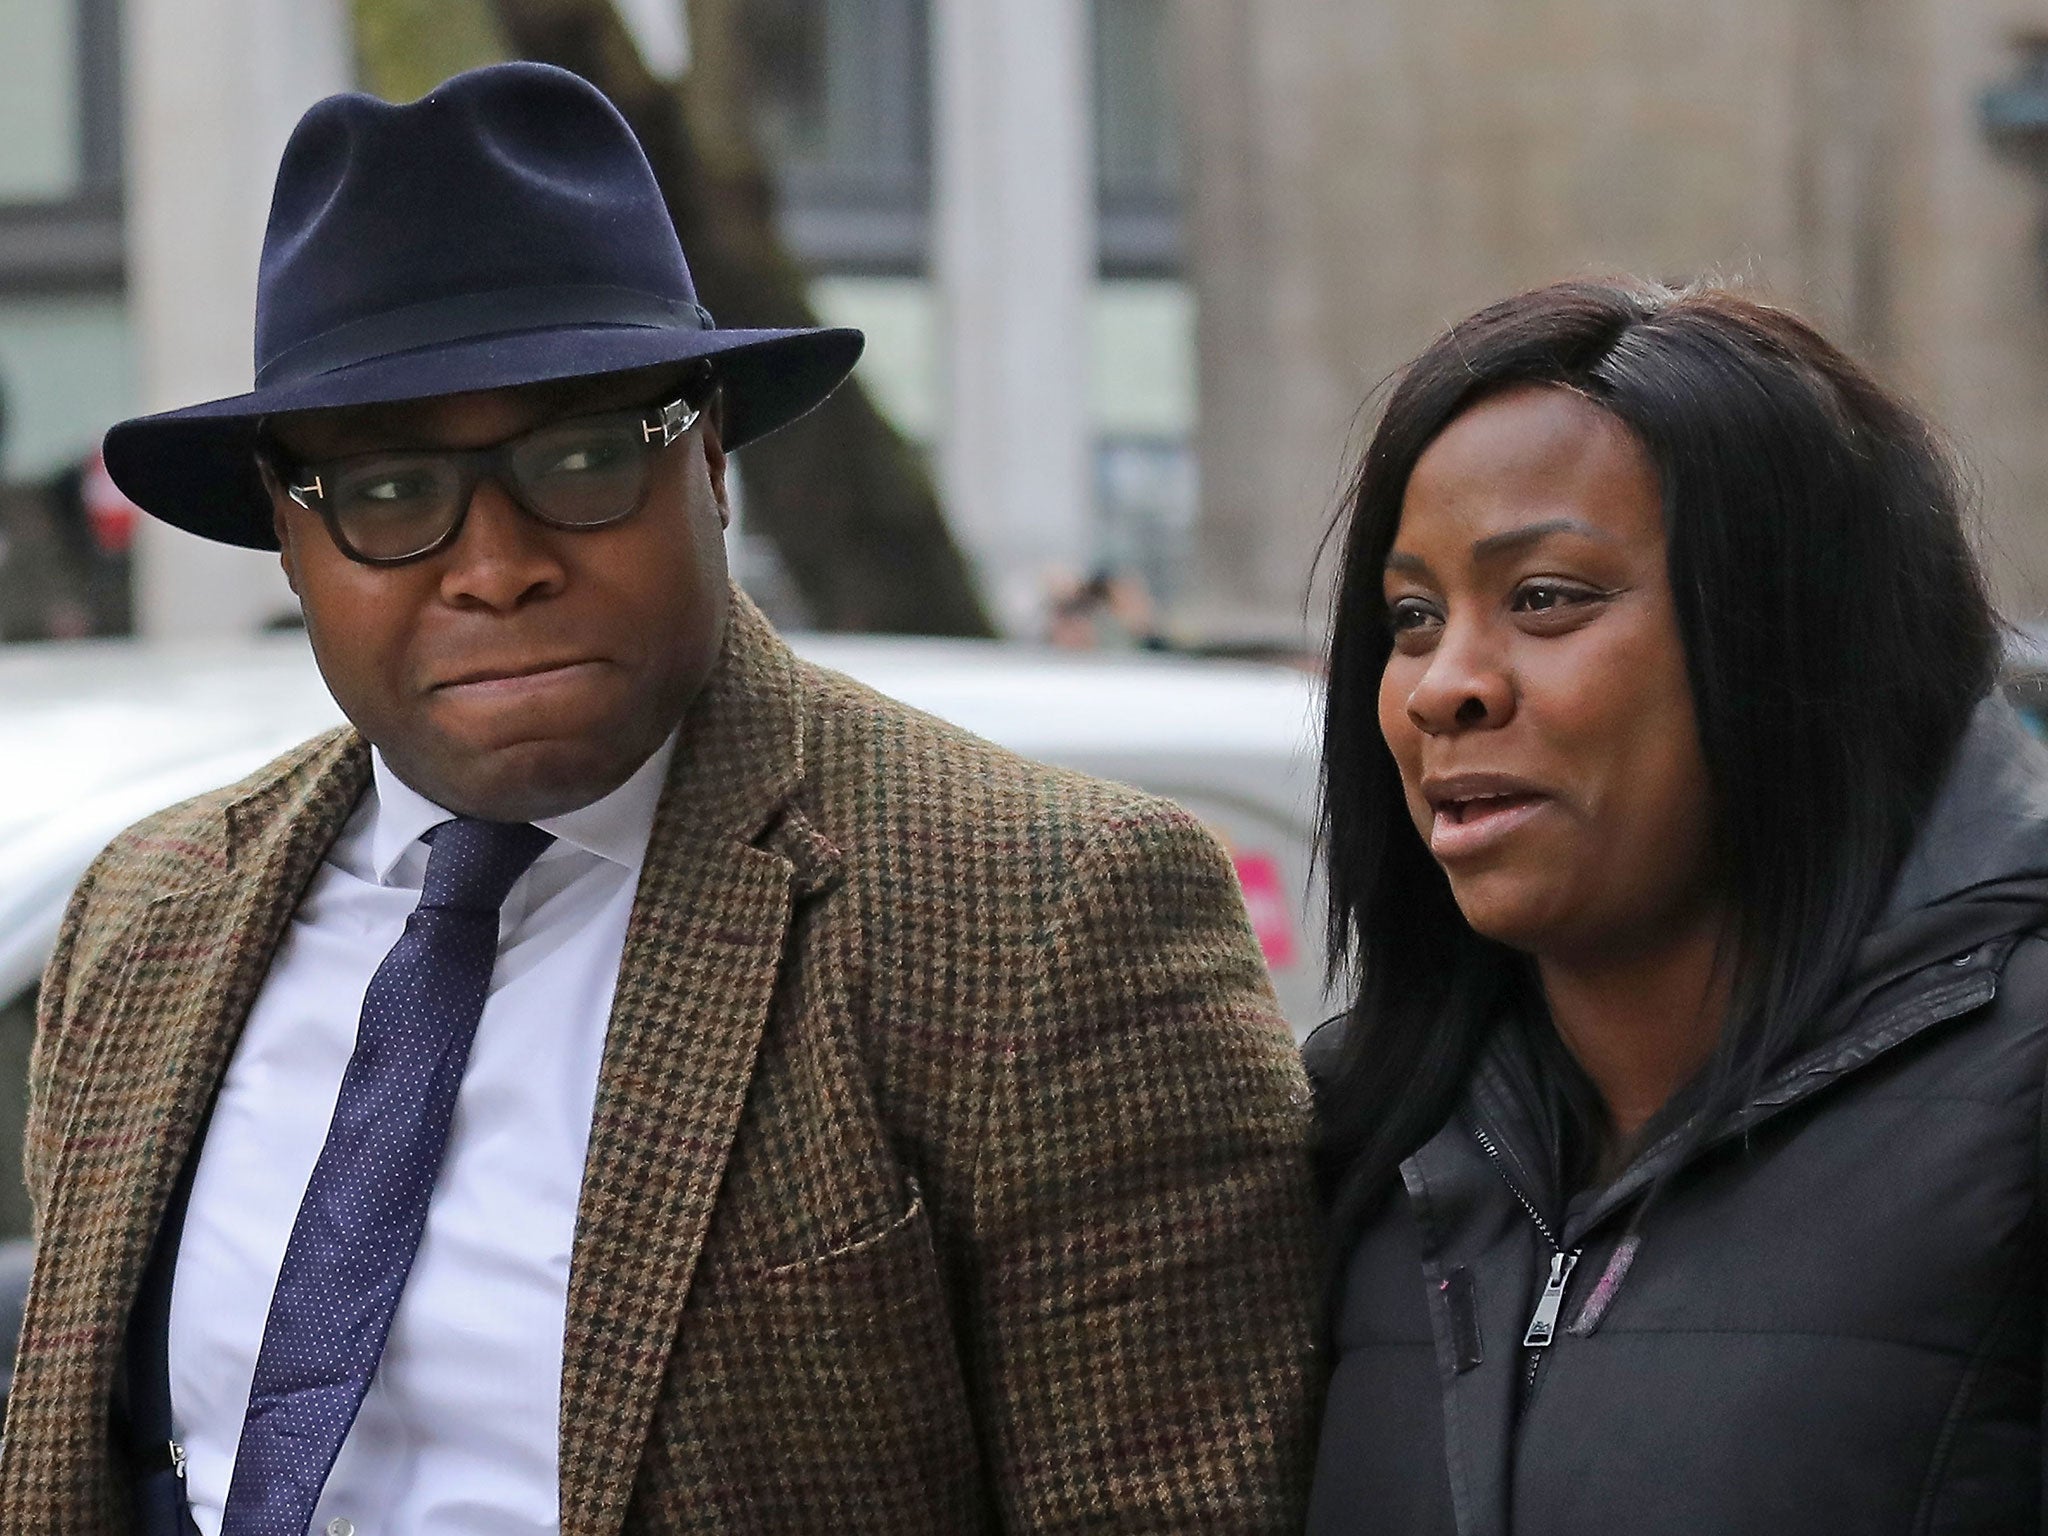 Isaiah Haastrup's mother Takesha Thomas and father Lanre Haastrup outside the High Court in London